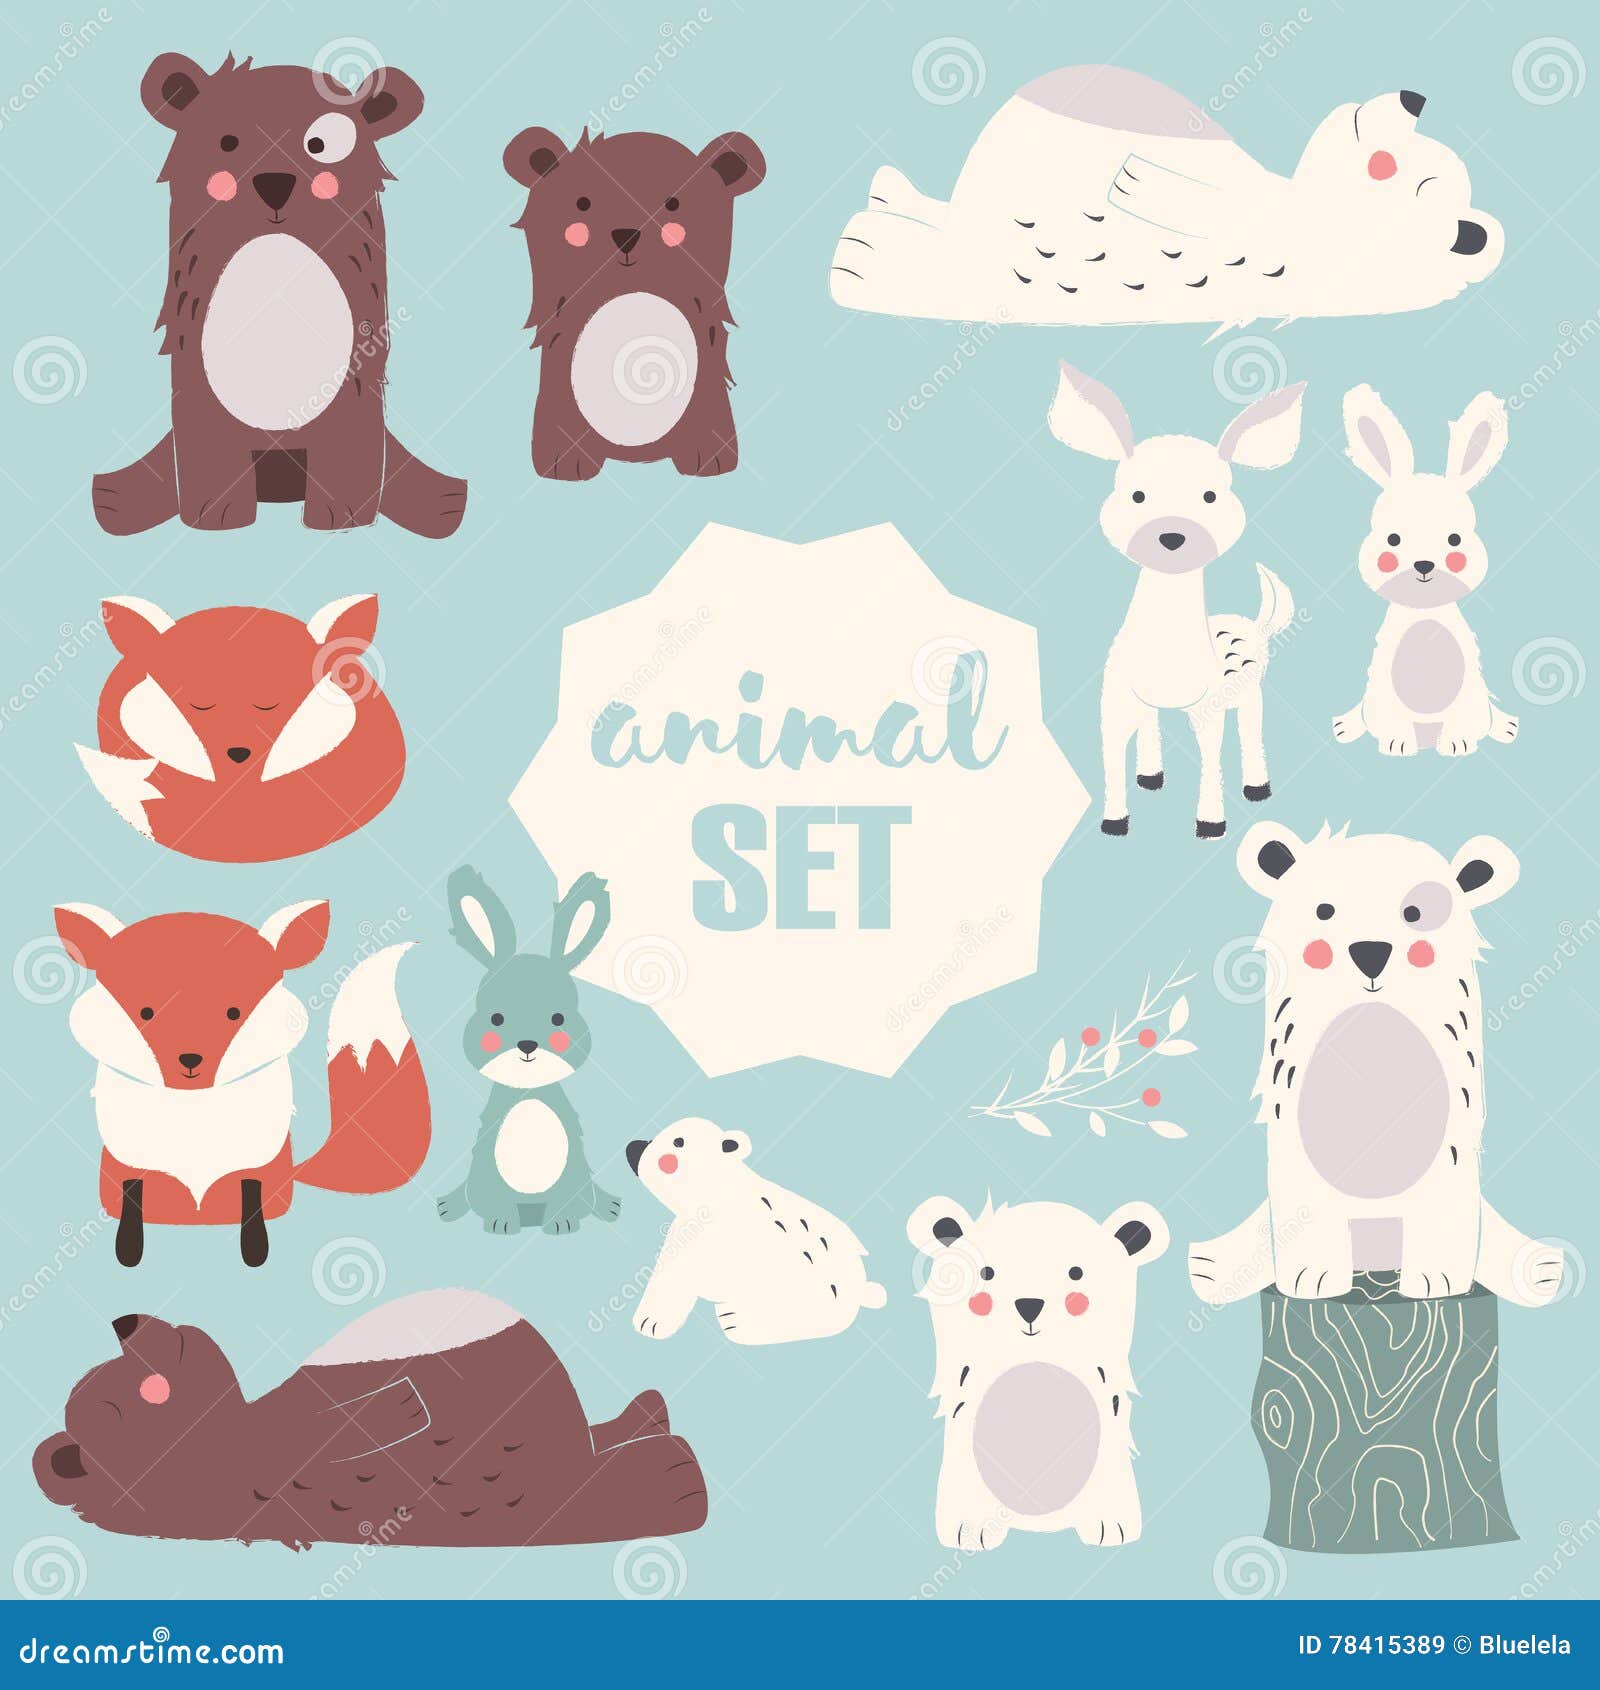 collection of cute forest and polar animals with baby cubs, including bear, fox, fawn and rabbit